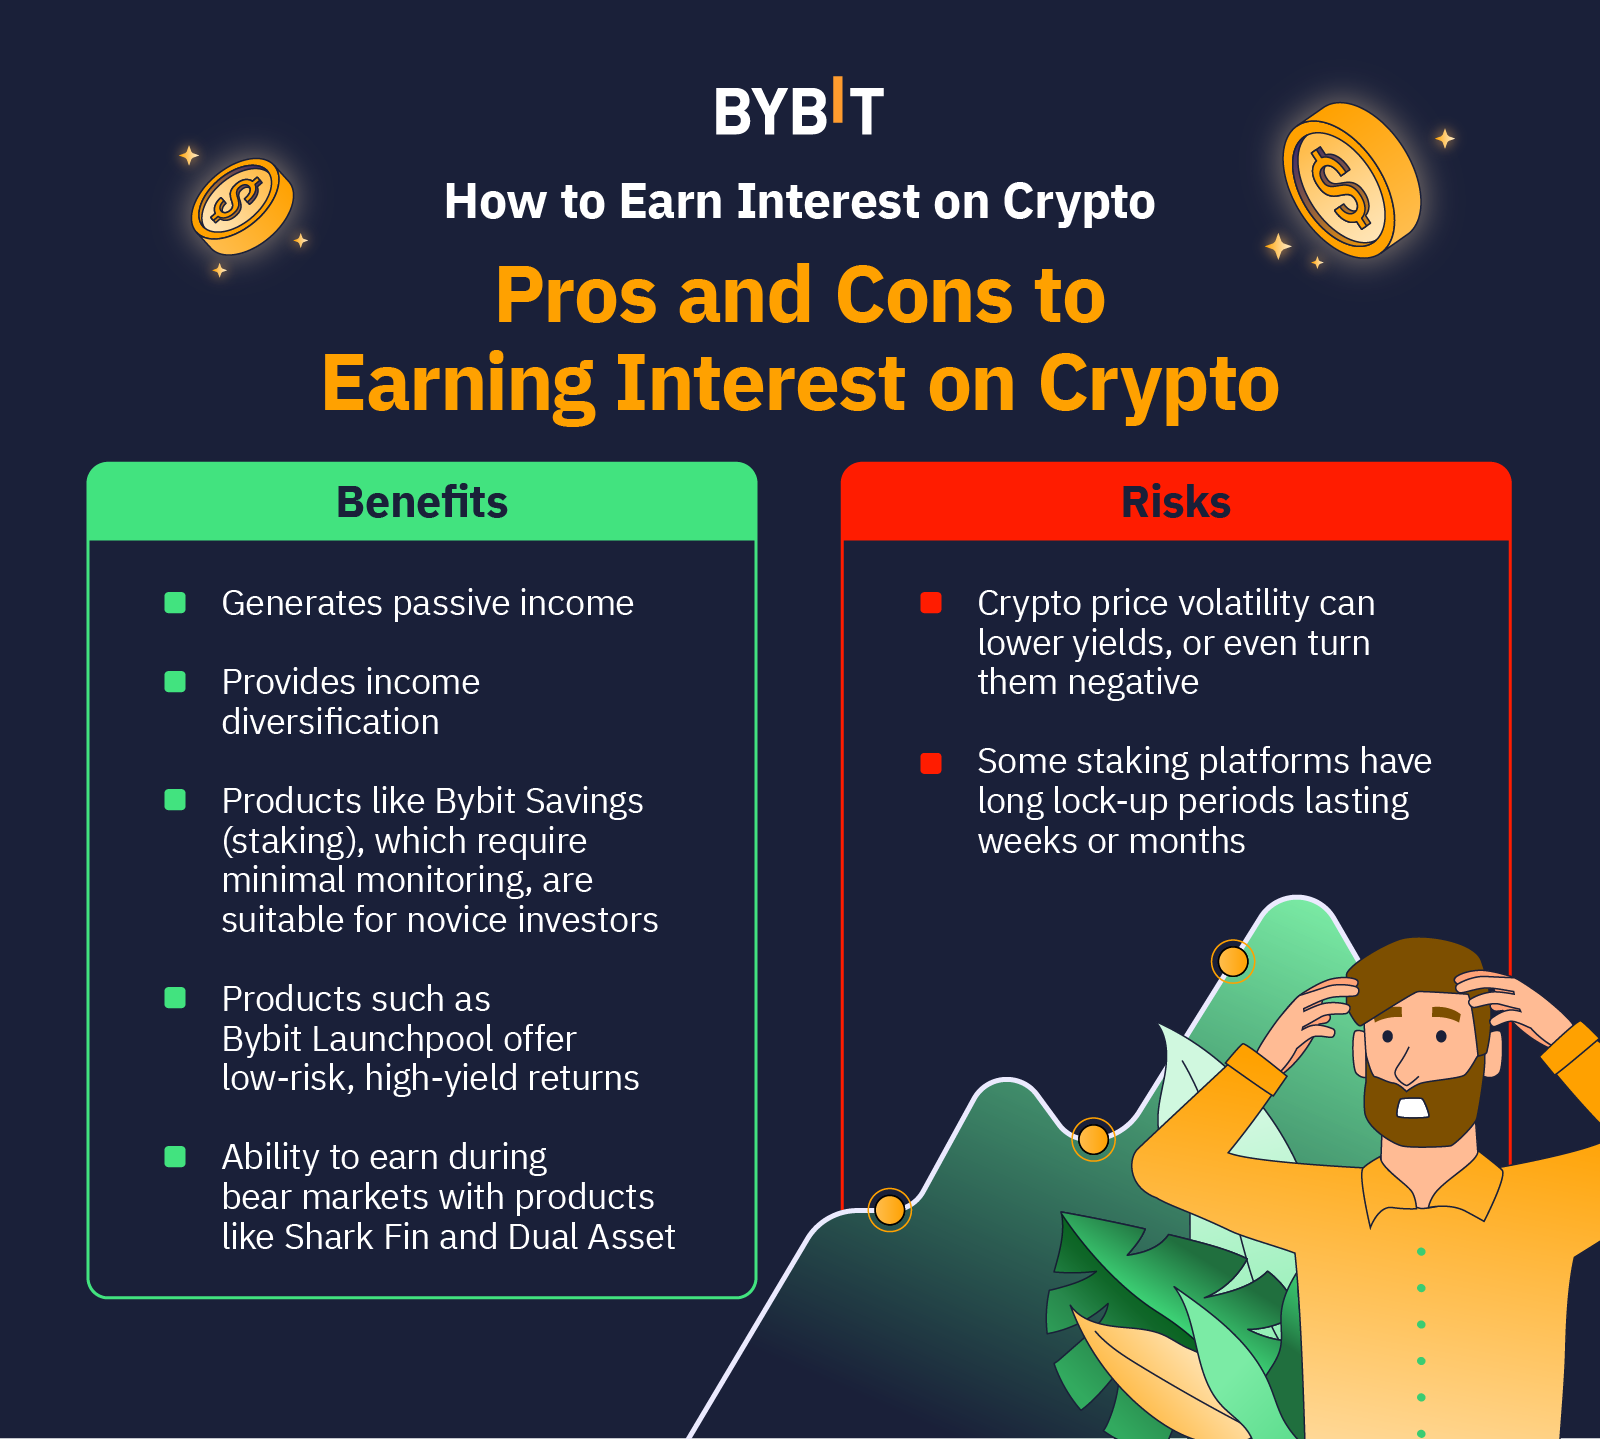 Table comparing pros and cons to earning interest on crypto.